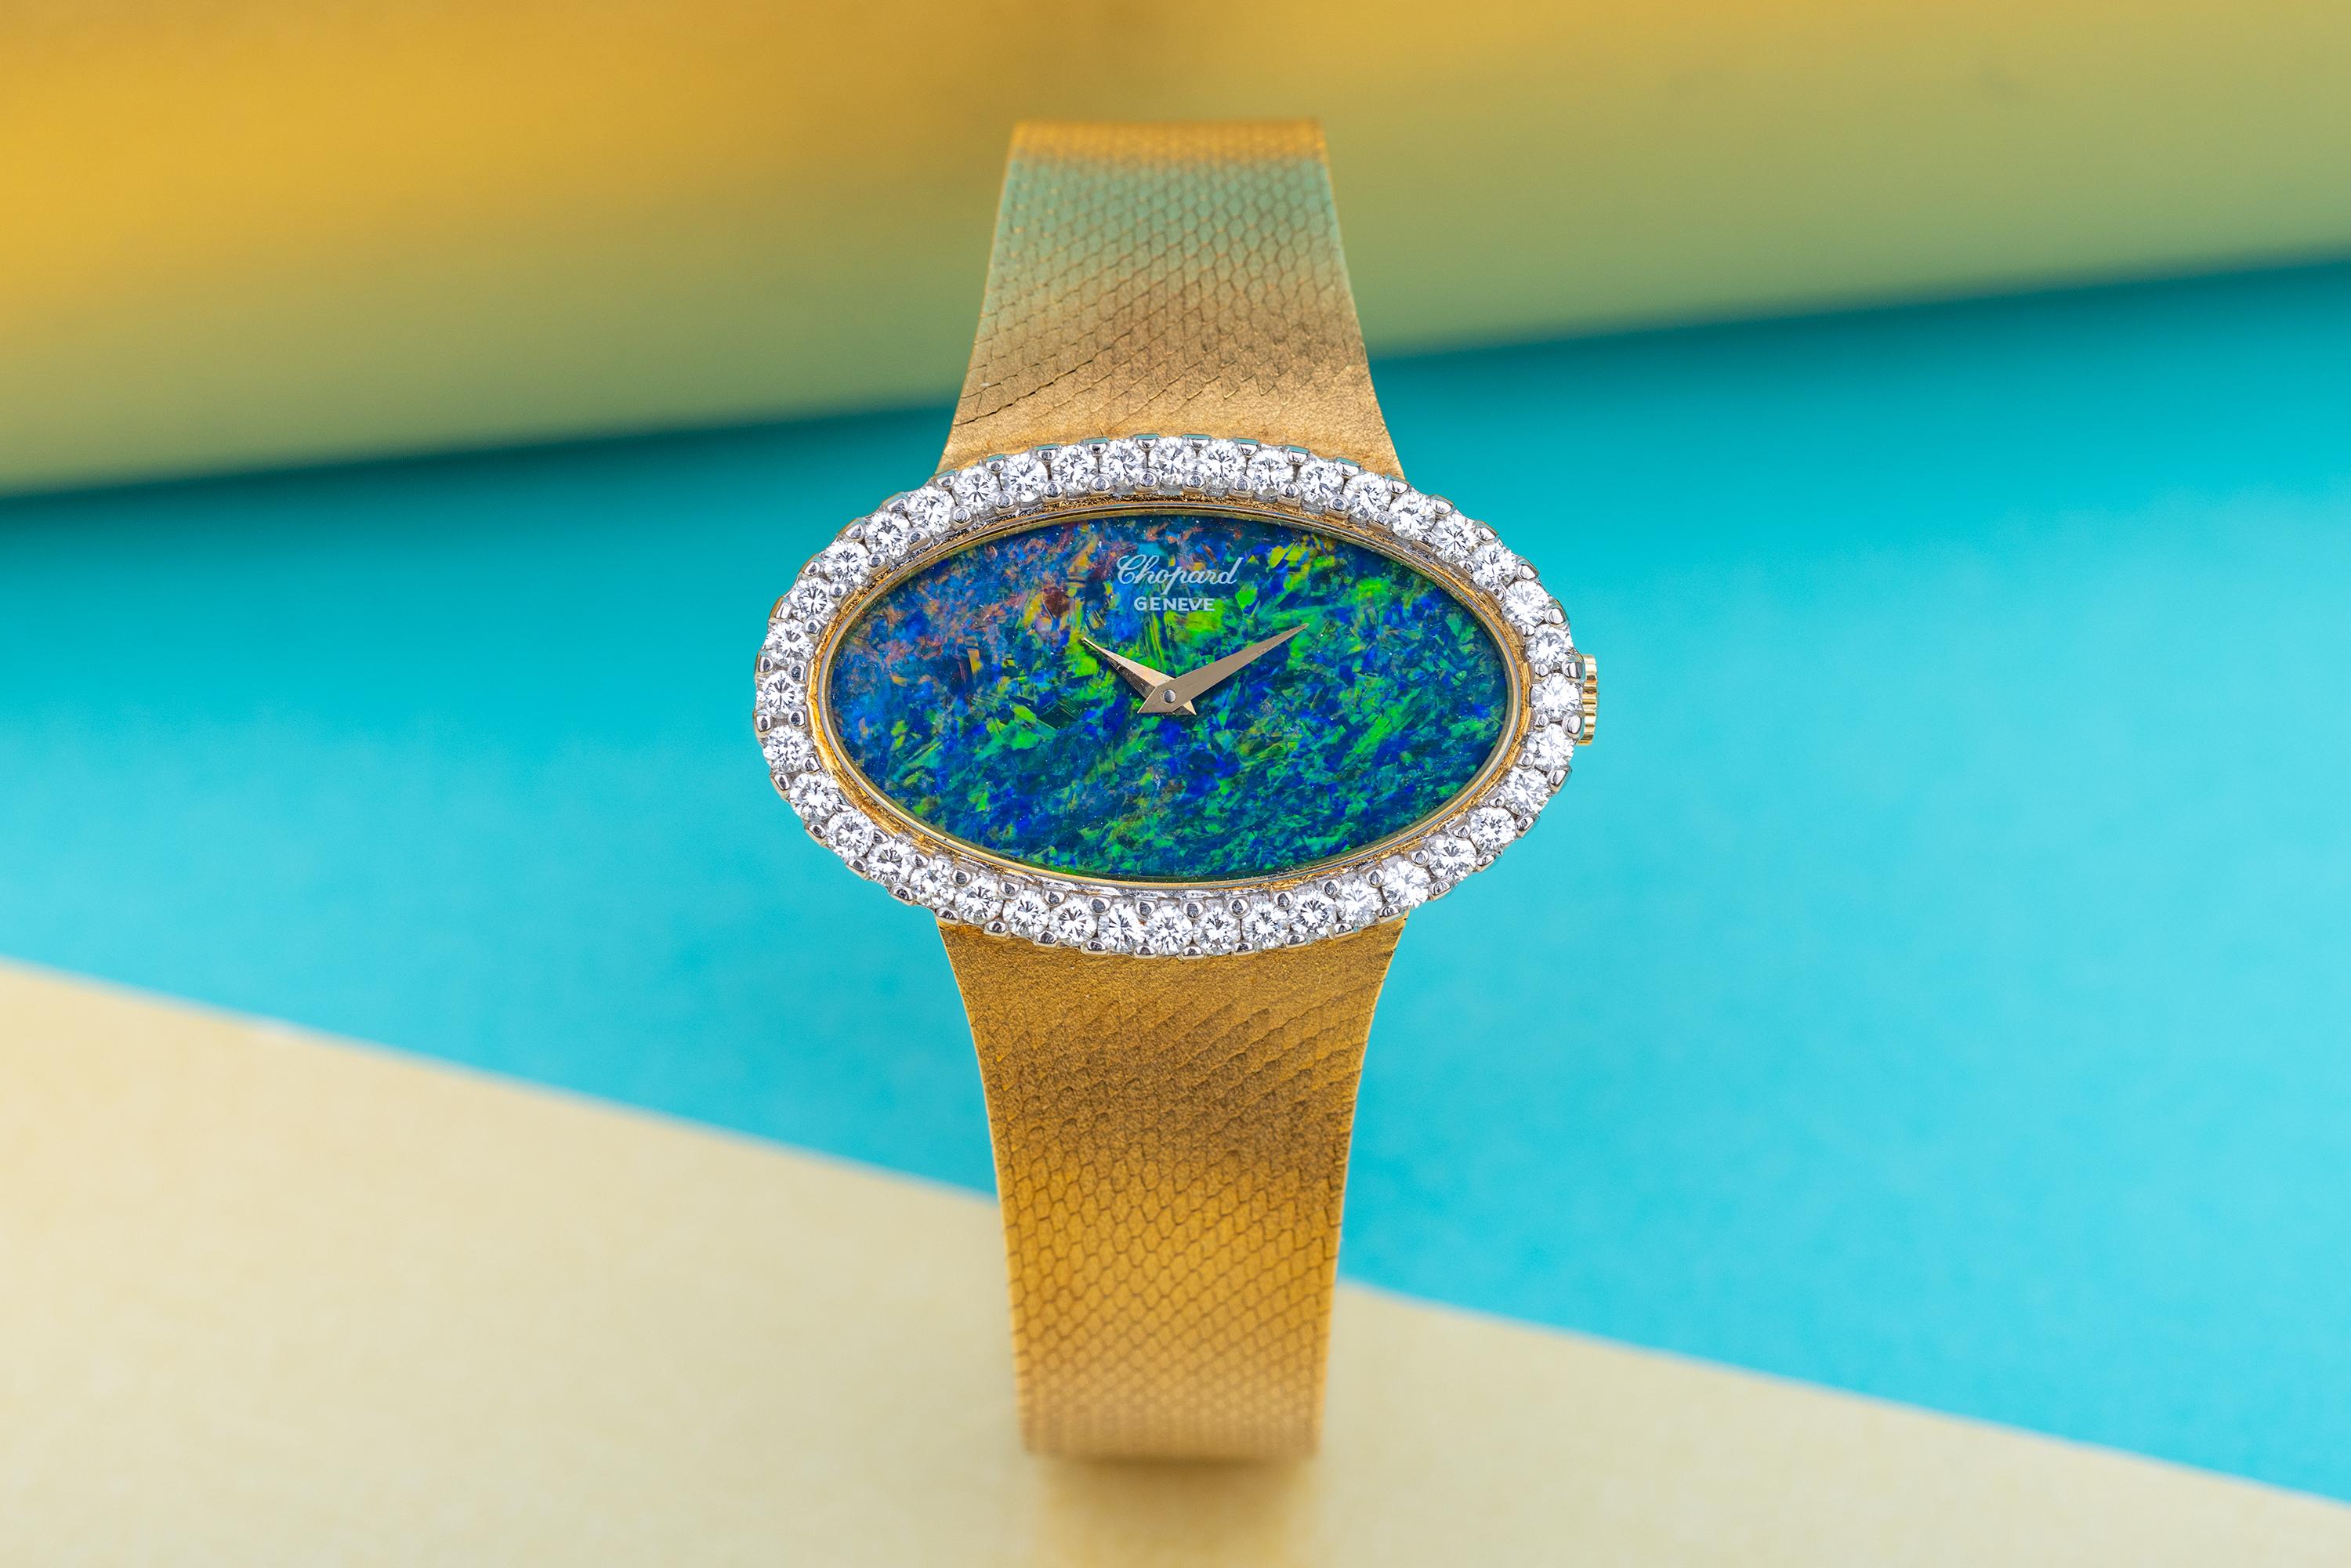 Pre-owned, excellent condition Chopard reference 5053 1, 18k Yellow Gold ladies wristwatch, circa 1970's. Incredible Opal dial, delicate gold hour & minute hands, Chopard logo at 12 o'clock, an 18k Yellow Gold stunning 35mm Oblong case, winder,